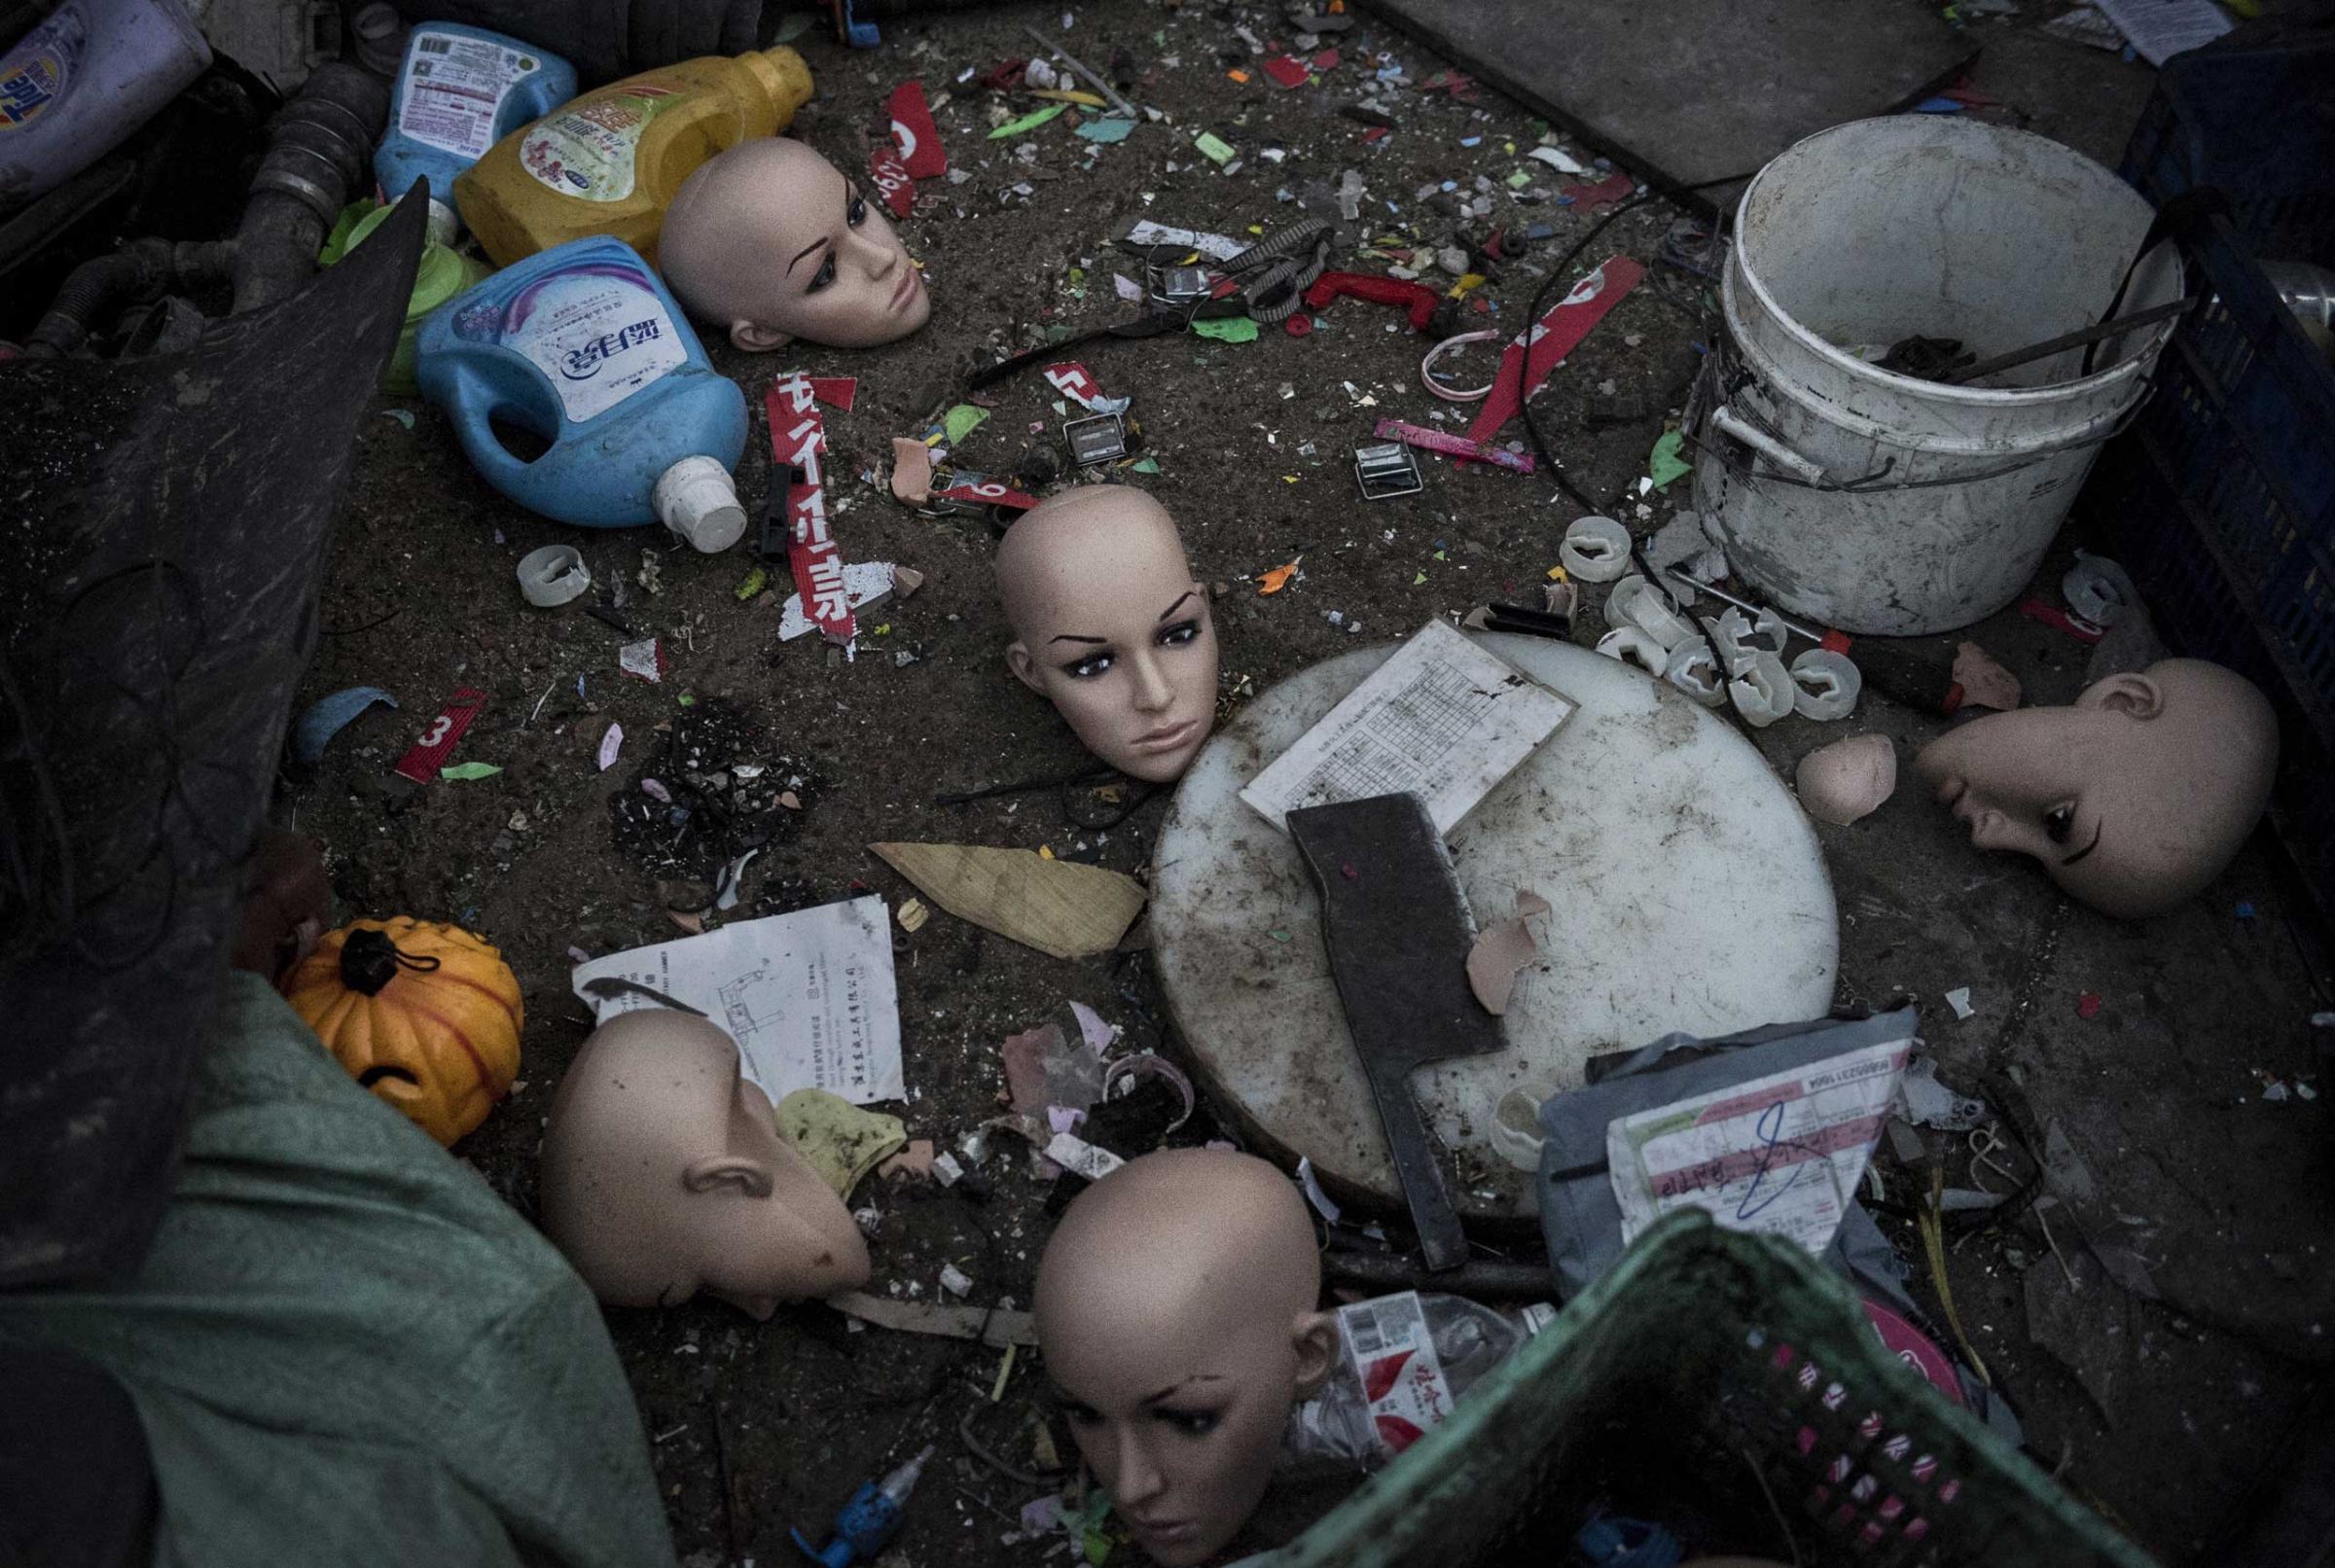 Plastic mannequin heads and other items lay on the ground before being recycled in the Dong Xiao Kou village on Dec. 15, 2014 in Beijing.